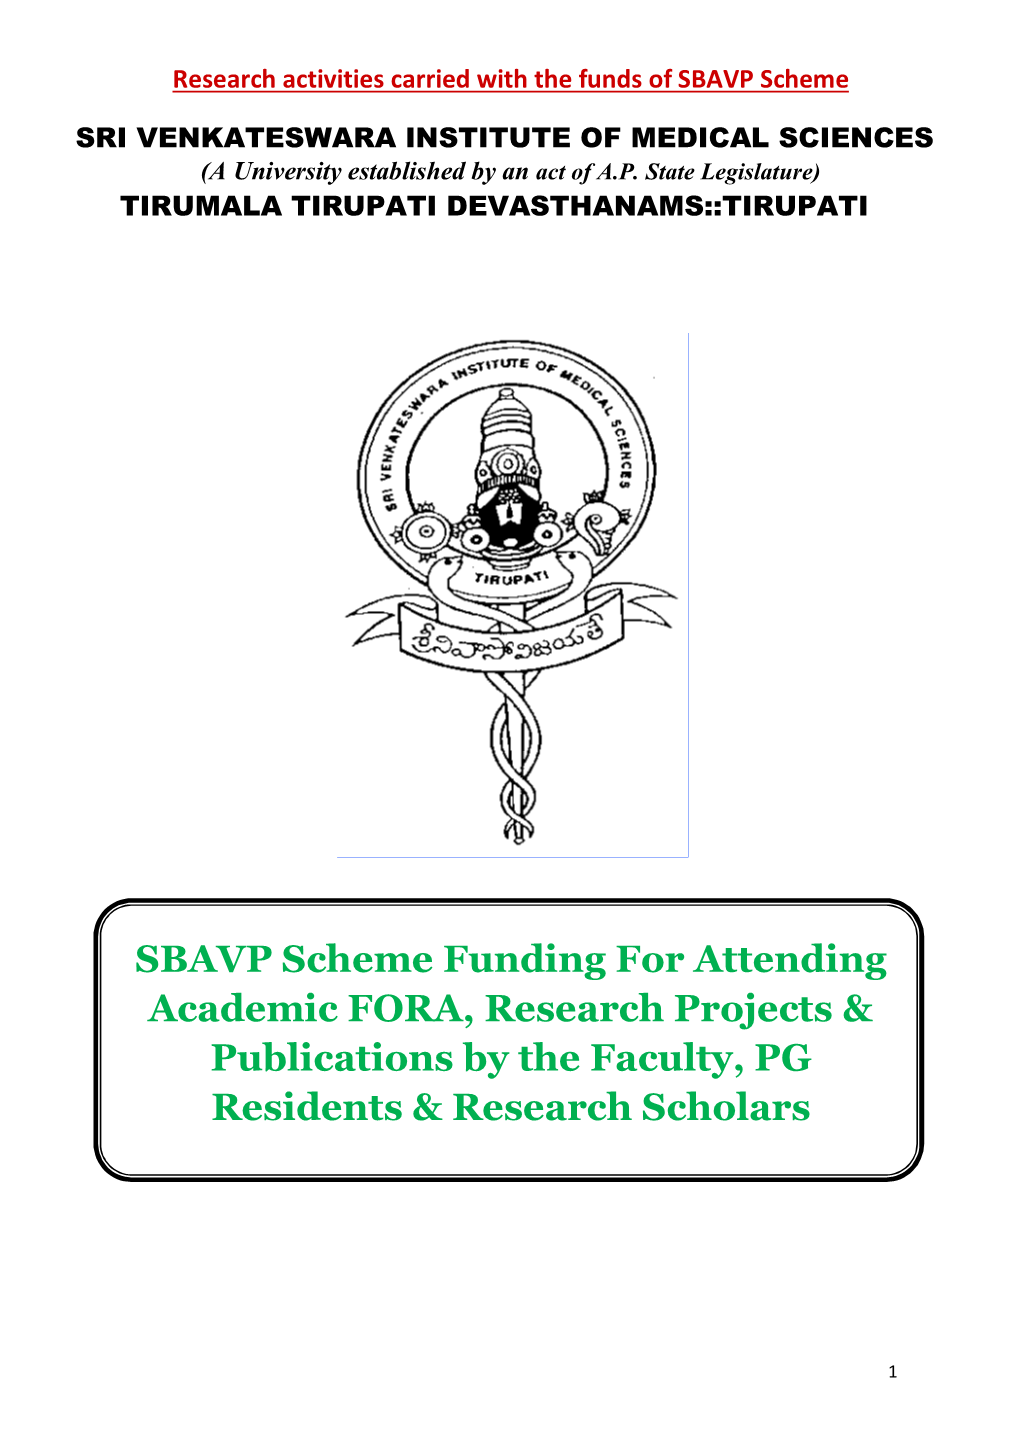 SBAVP Scheme Funding for Attending Academic FORA, Research Projects & Publications by the Faculty, PG Residents & Research Scholars